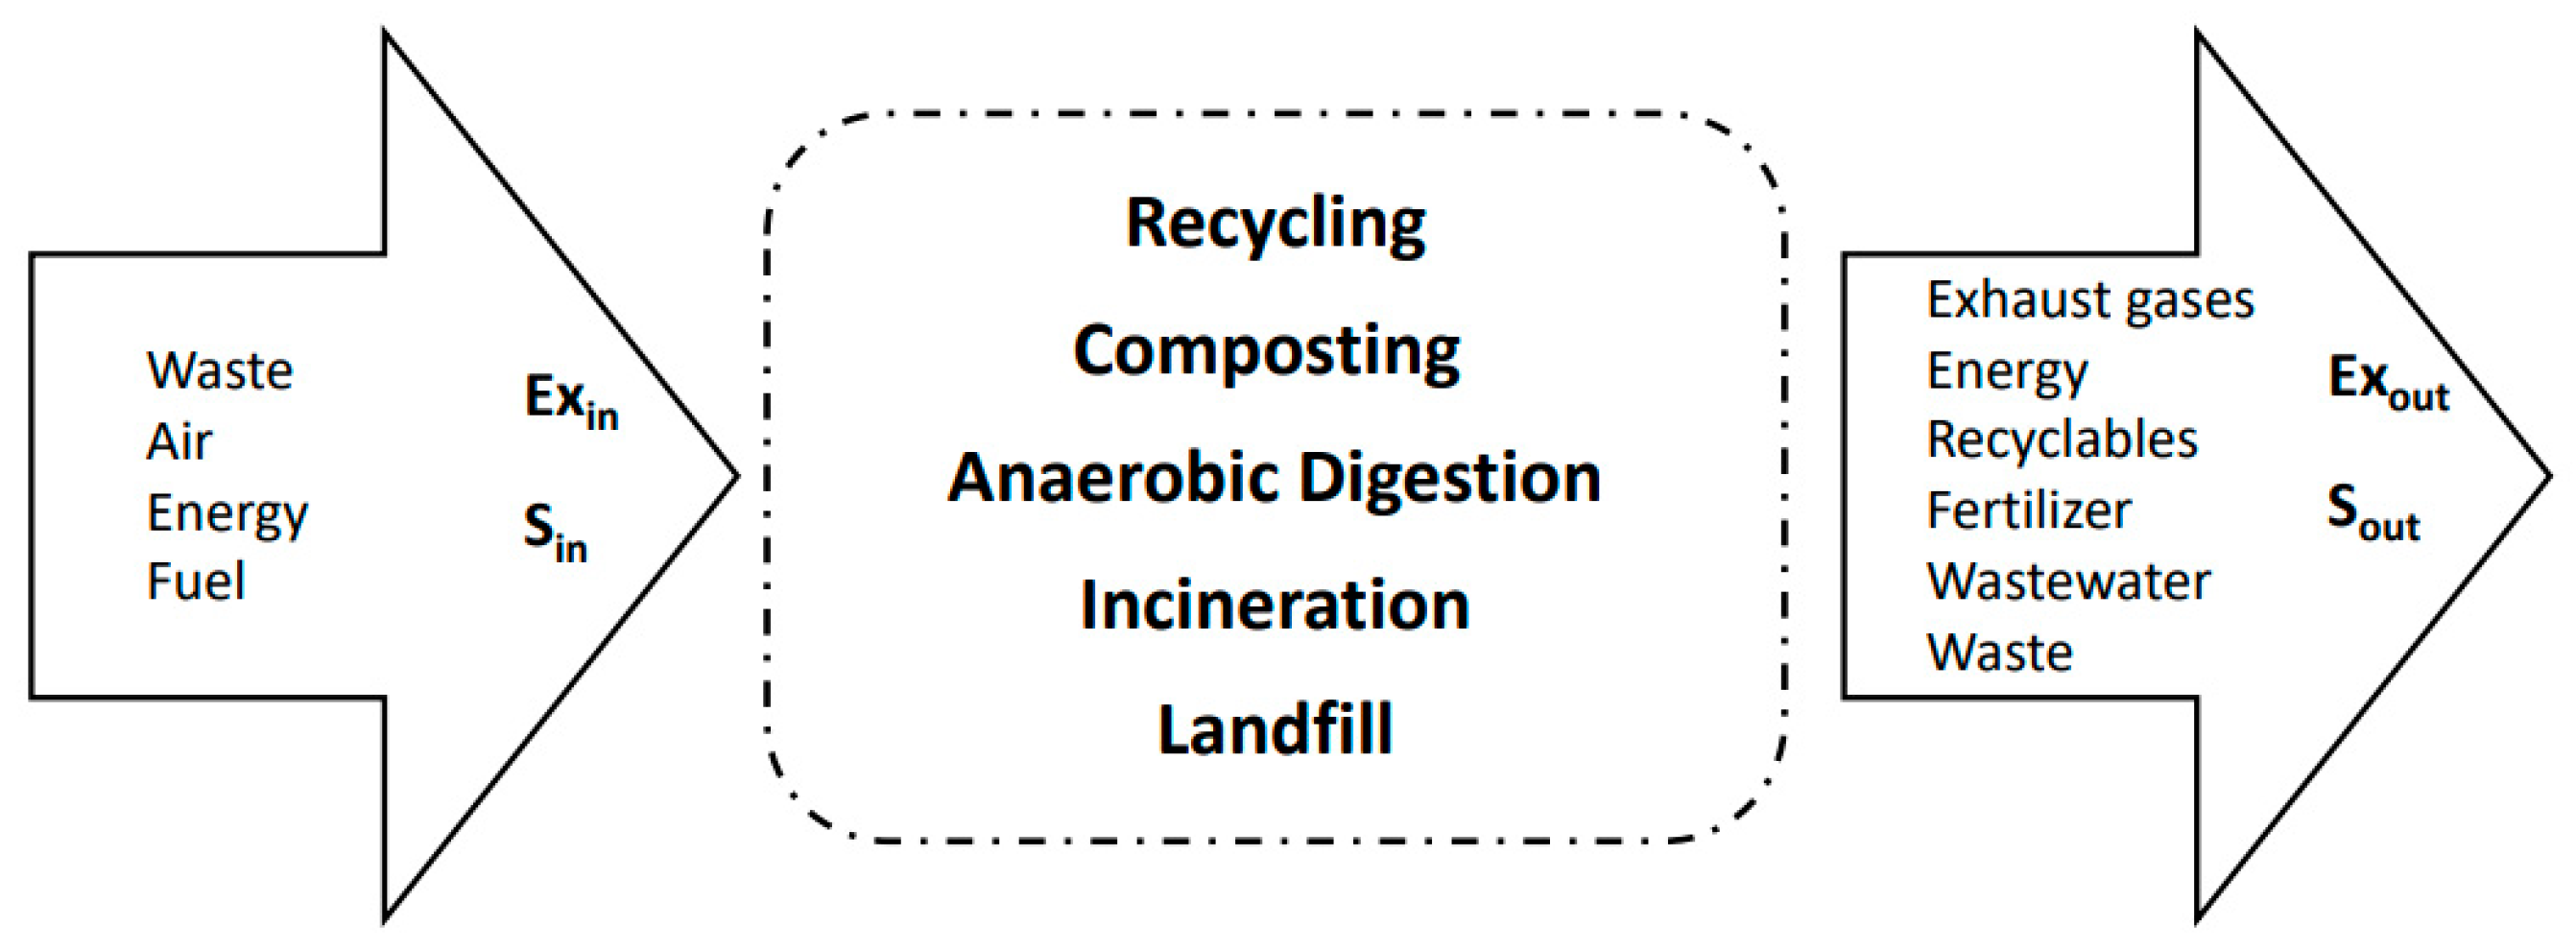 Activated Carbon for Wastewater Treatment » Ecologix Systems